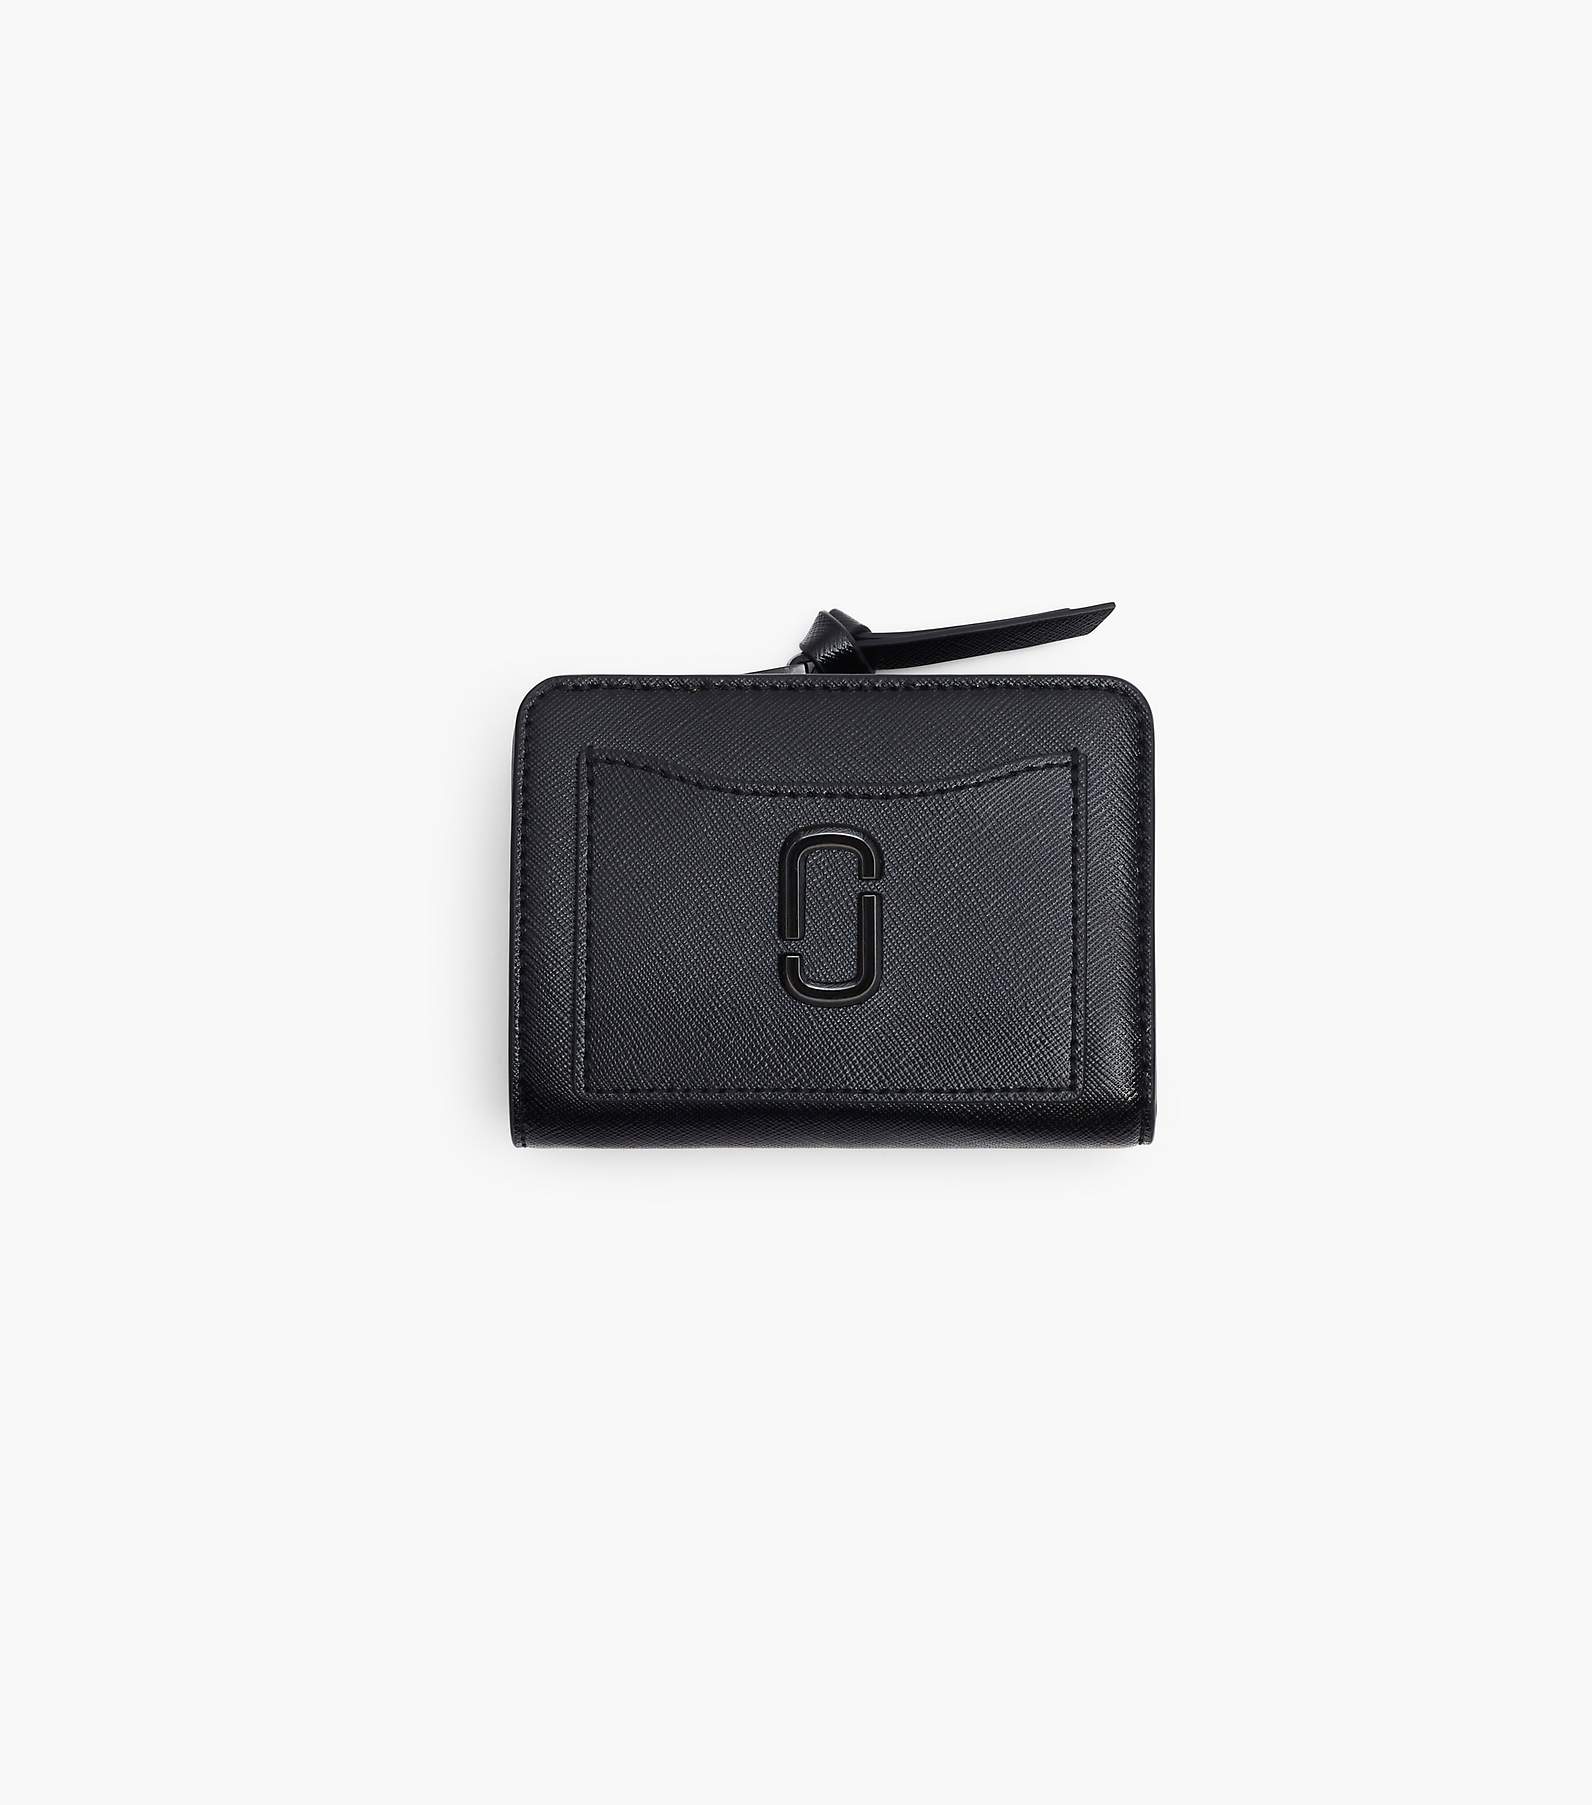 The Snapshot Mini Compact Black Leather Wallet